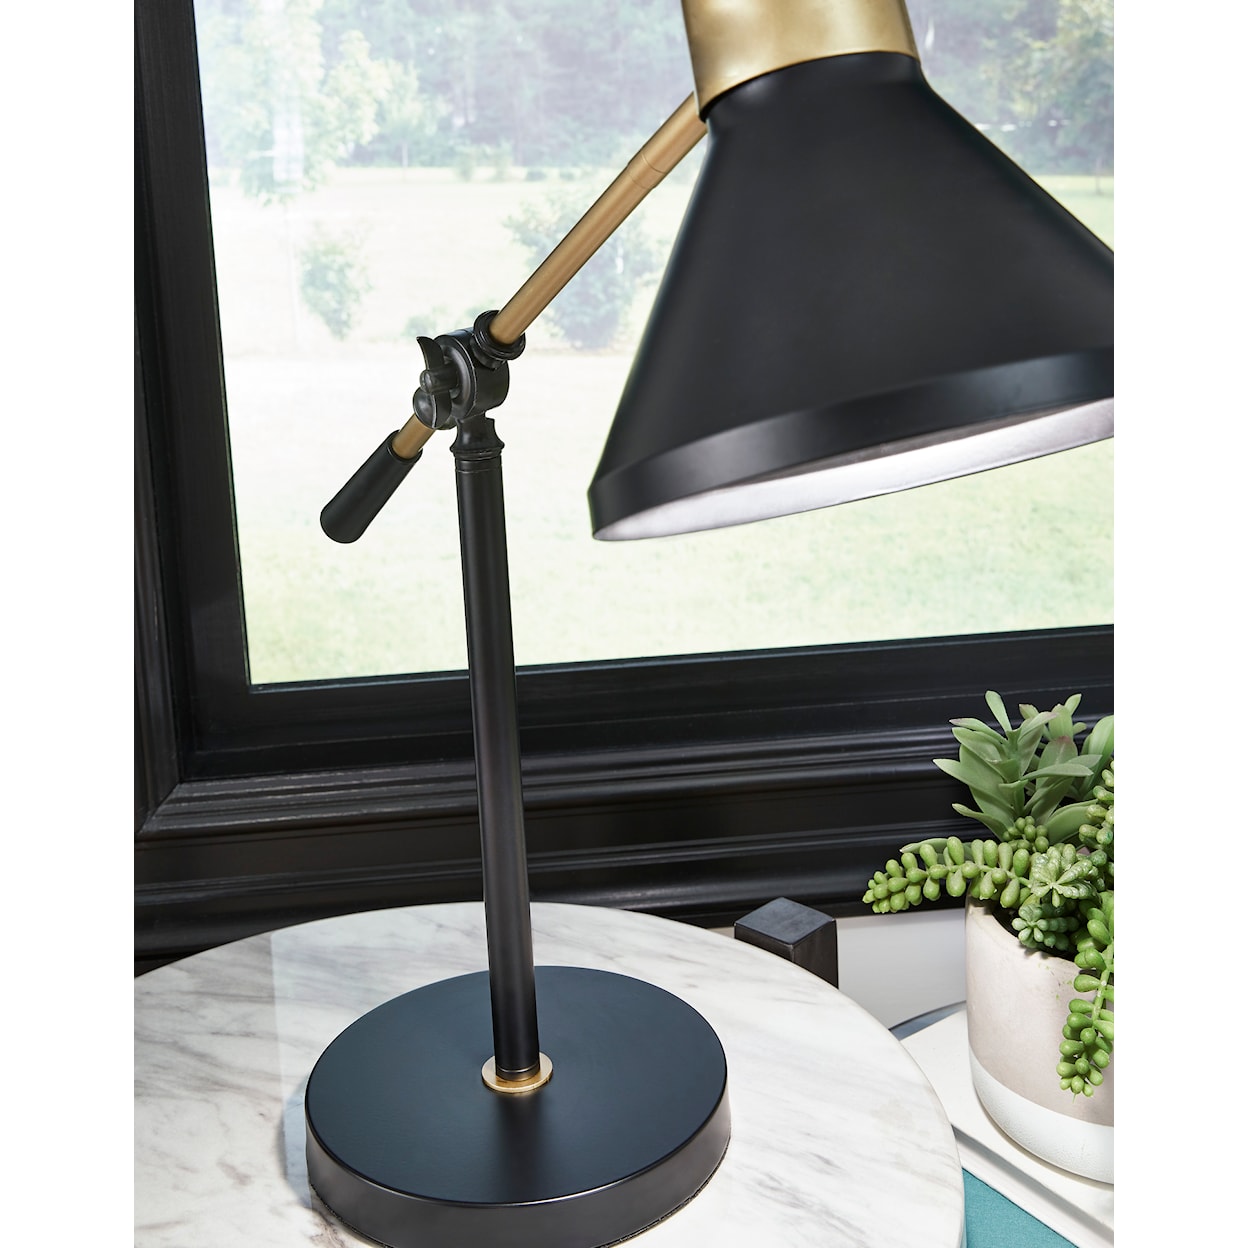 Signature Design by Ashley Lamps - Contemporary Garville Desk Lamp